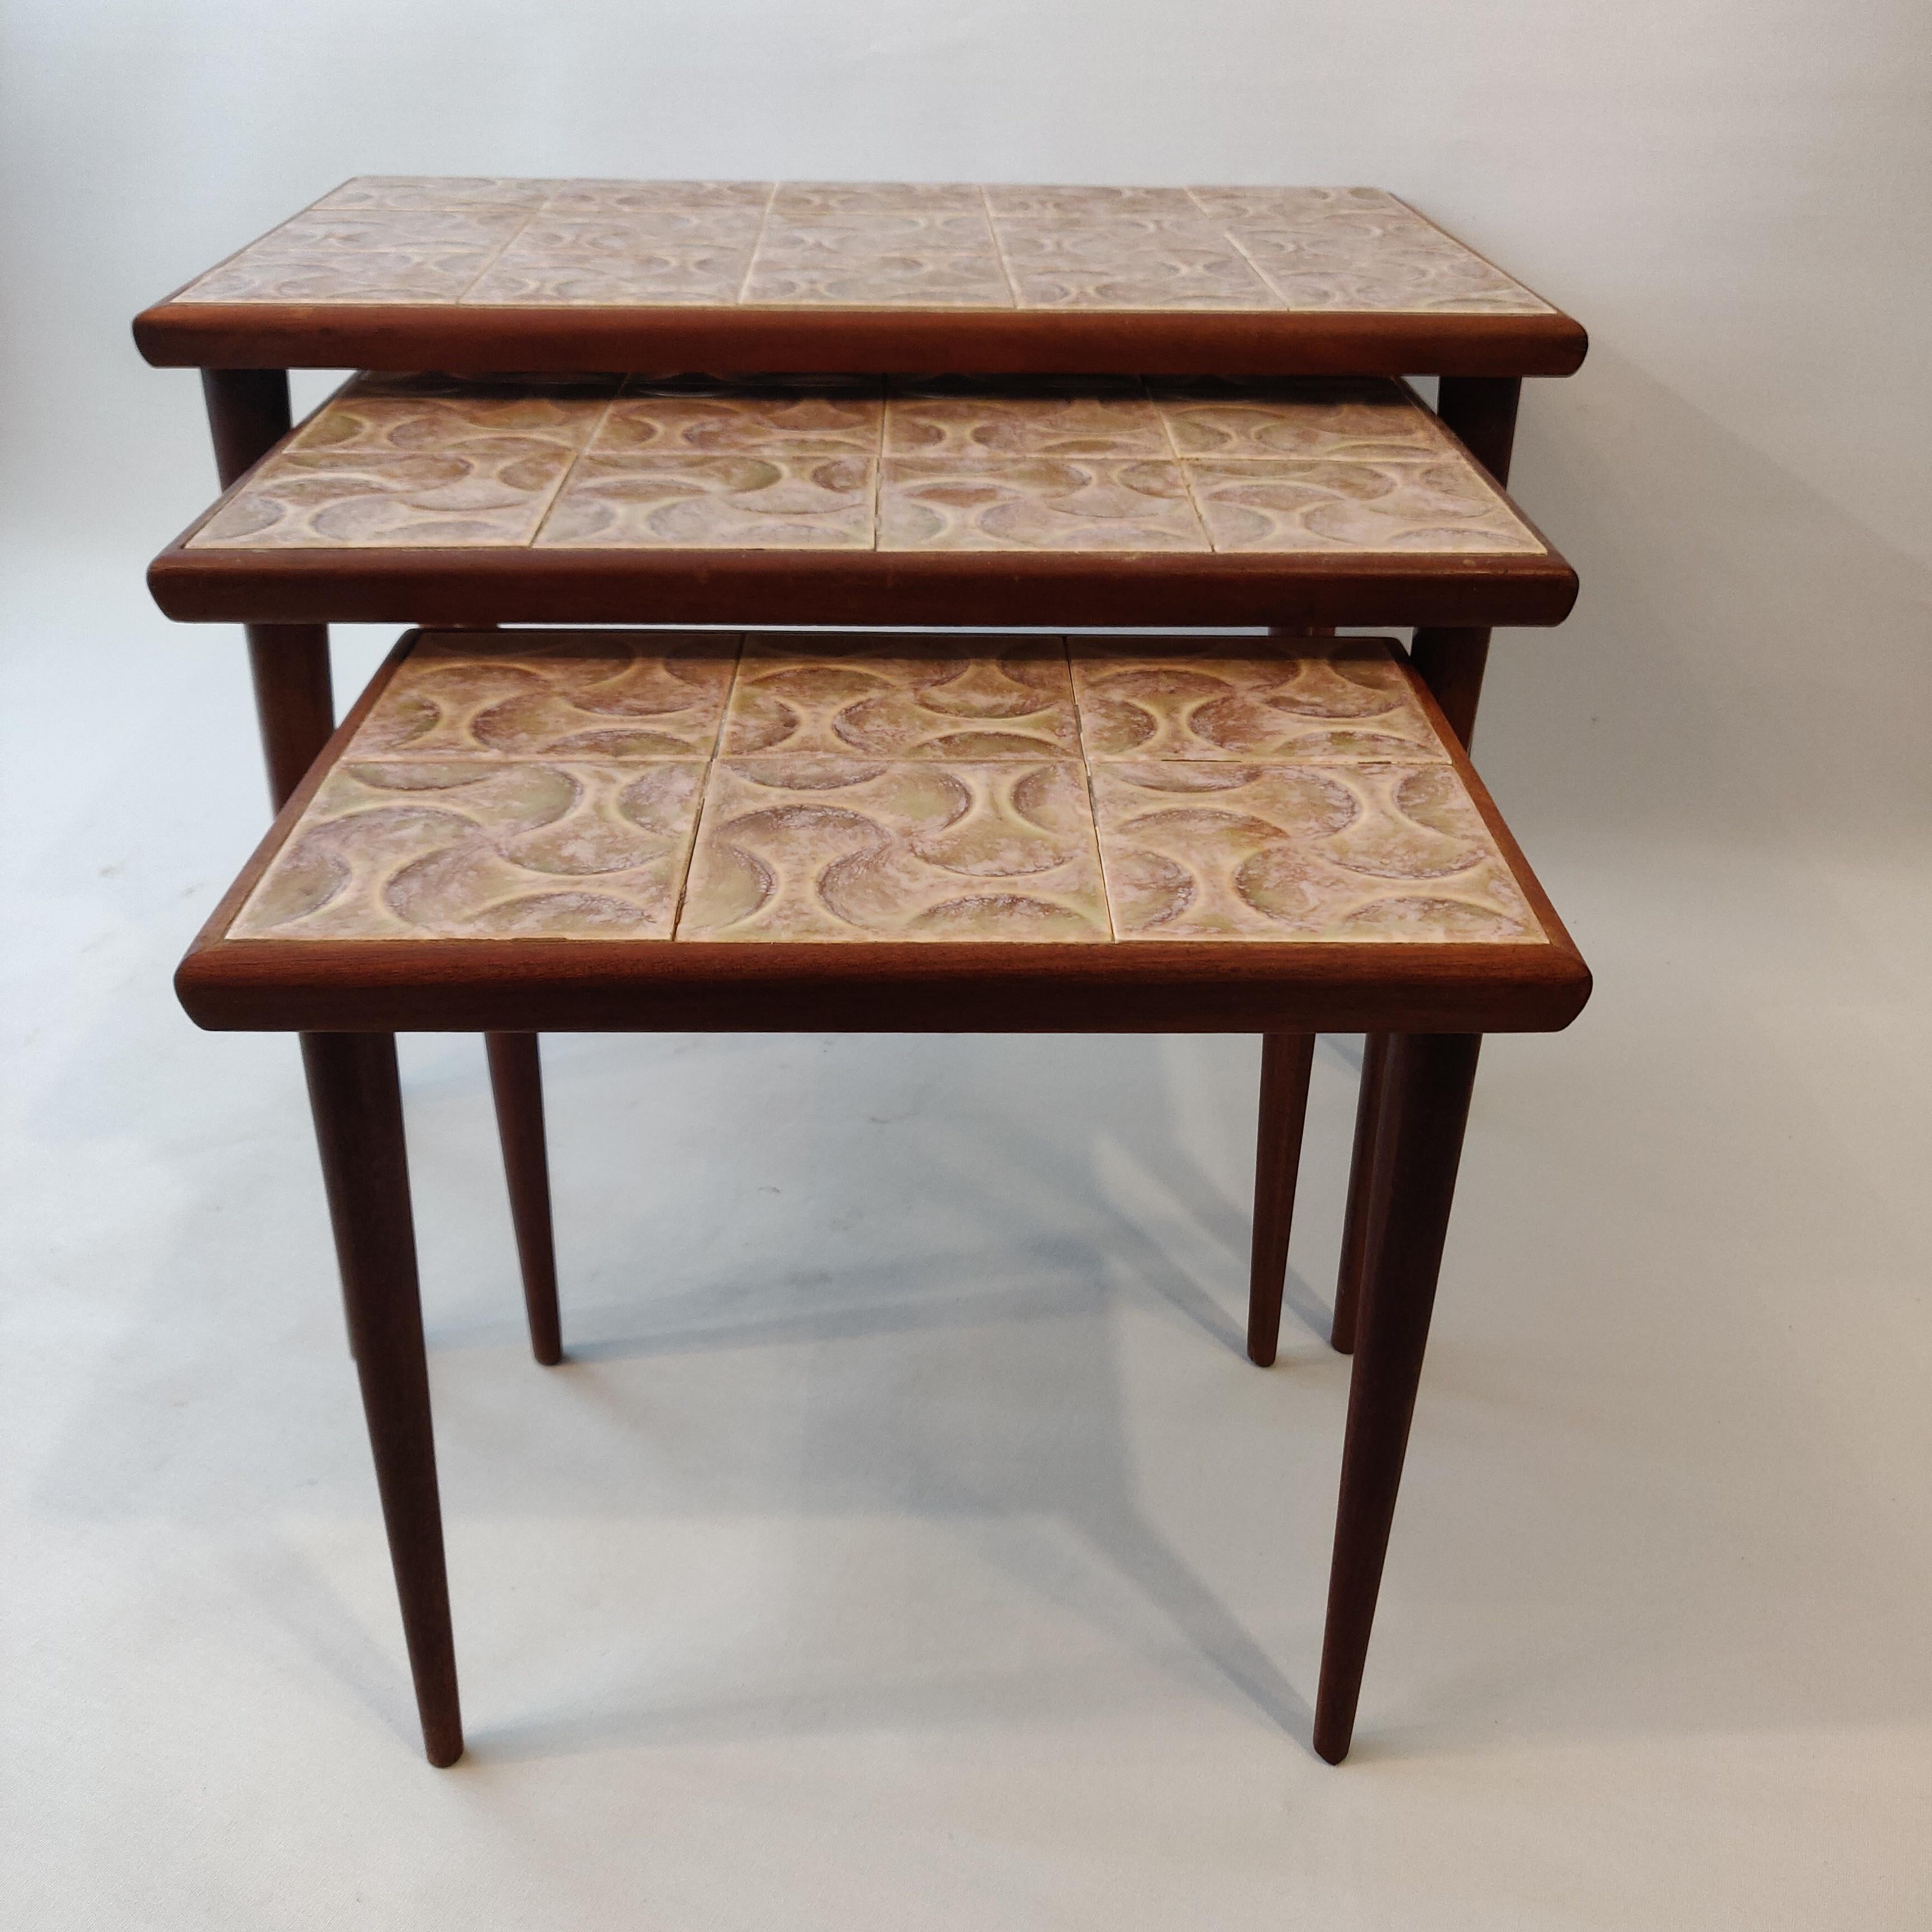 Set of three Danish mid century modern nesting tables, 1960s.
The frame of the tables is made of teak wood, which gives the frame its beautiful deep brown color. The top of the table is covered with ceramic tiles in different shades of cream and